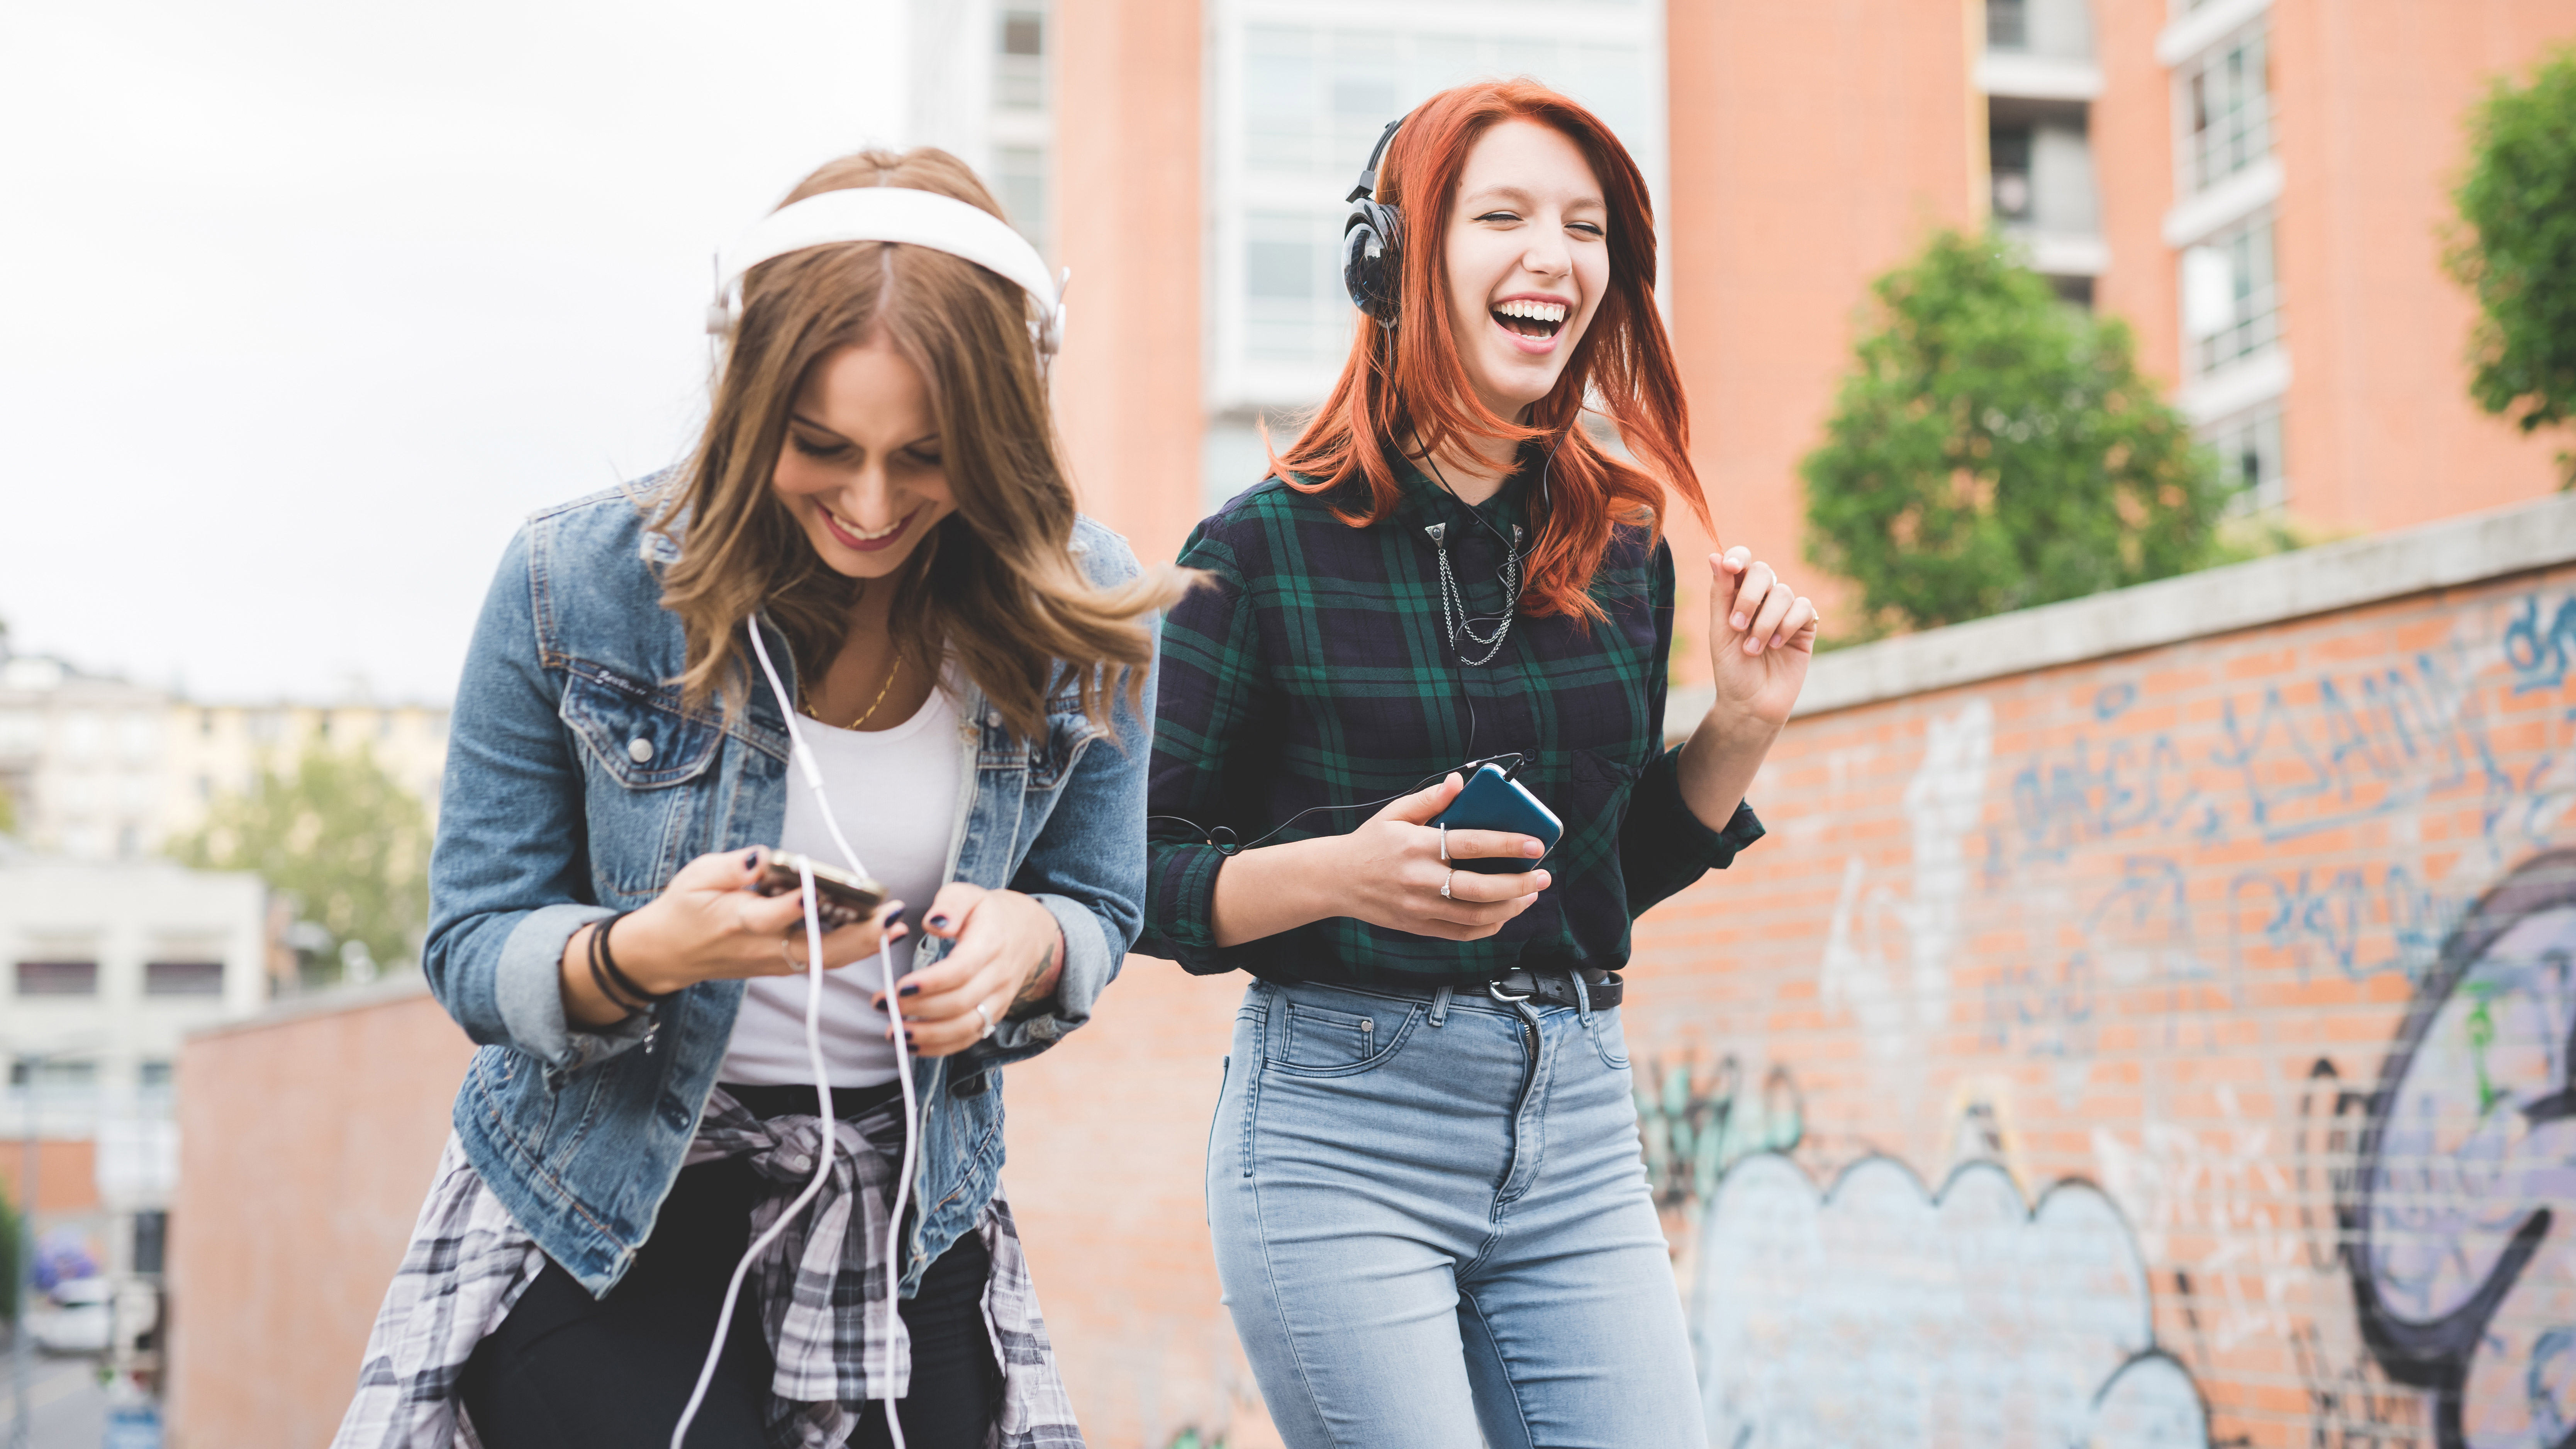 Two young women dancing in the city listening to music with headphones